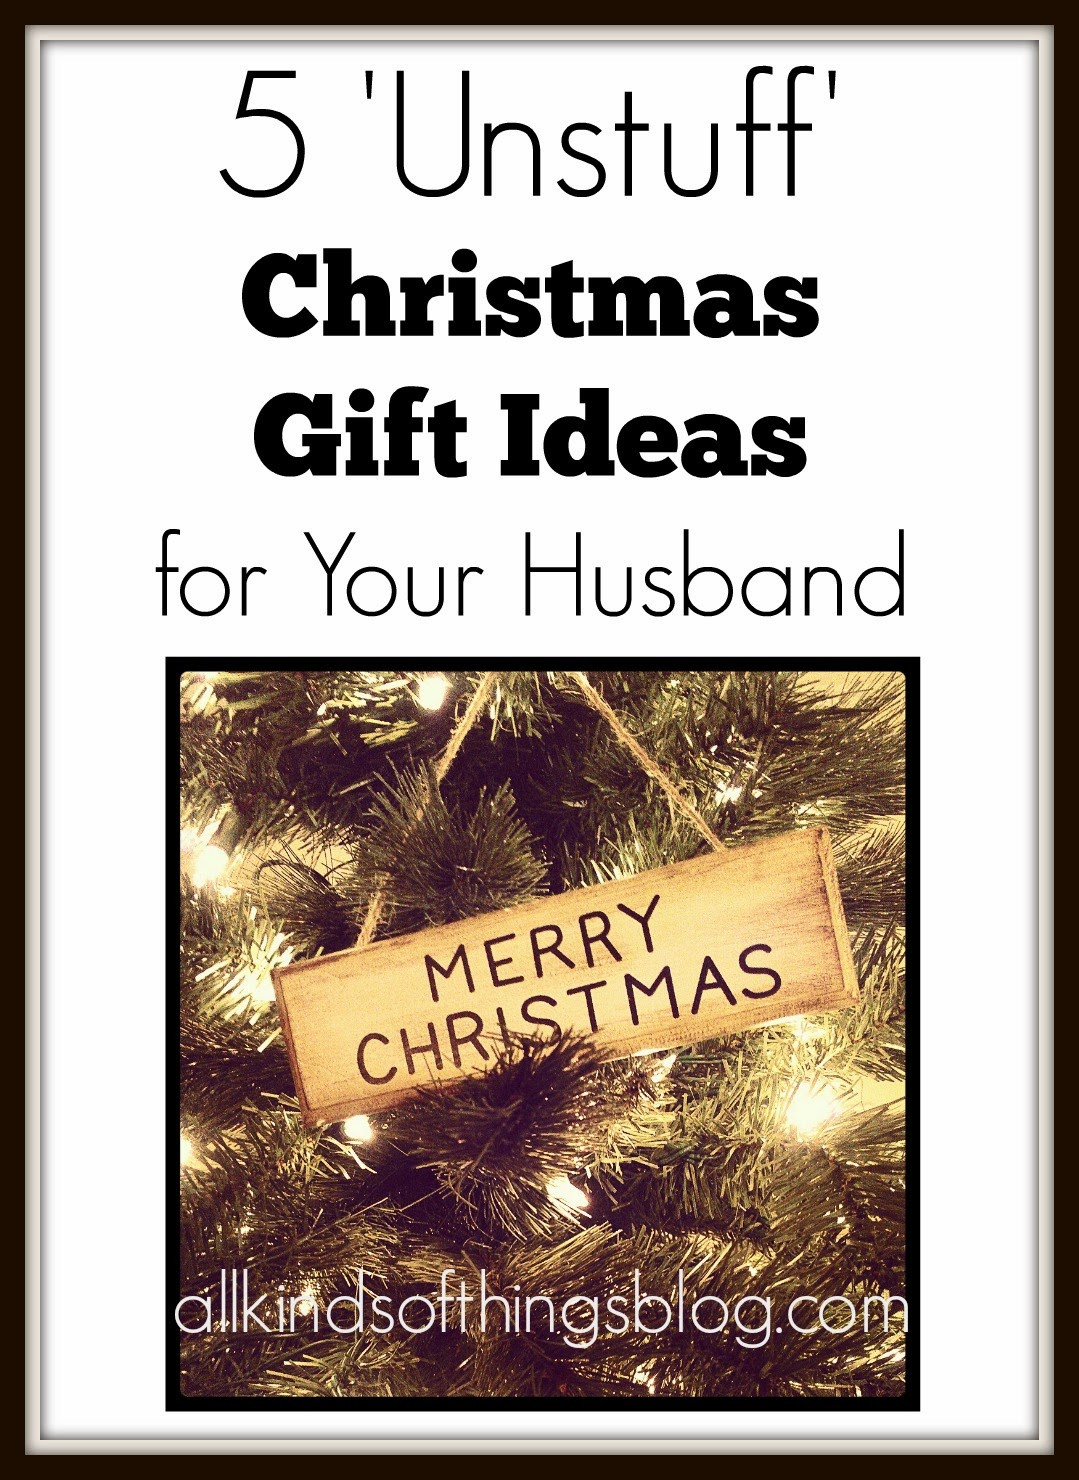 Christmas Gift Ideas For Husband
 All Kinds of Things 5 Unstuff Christmas Gift Ideas for